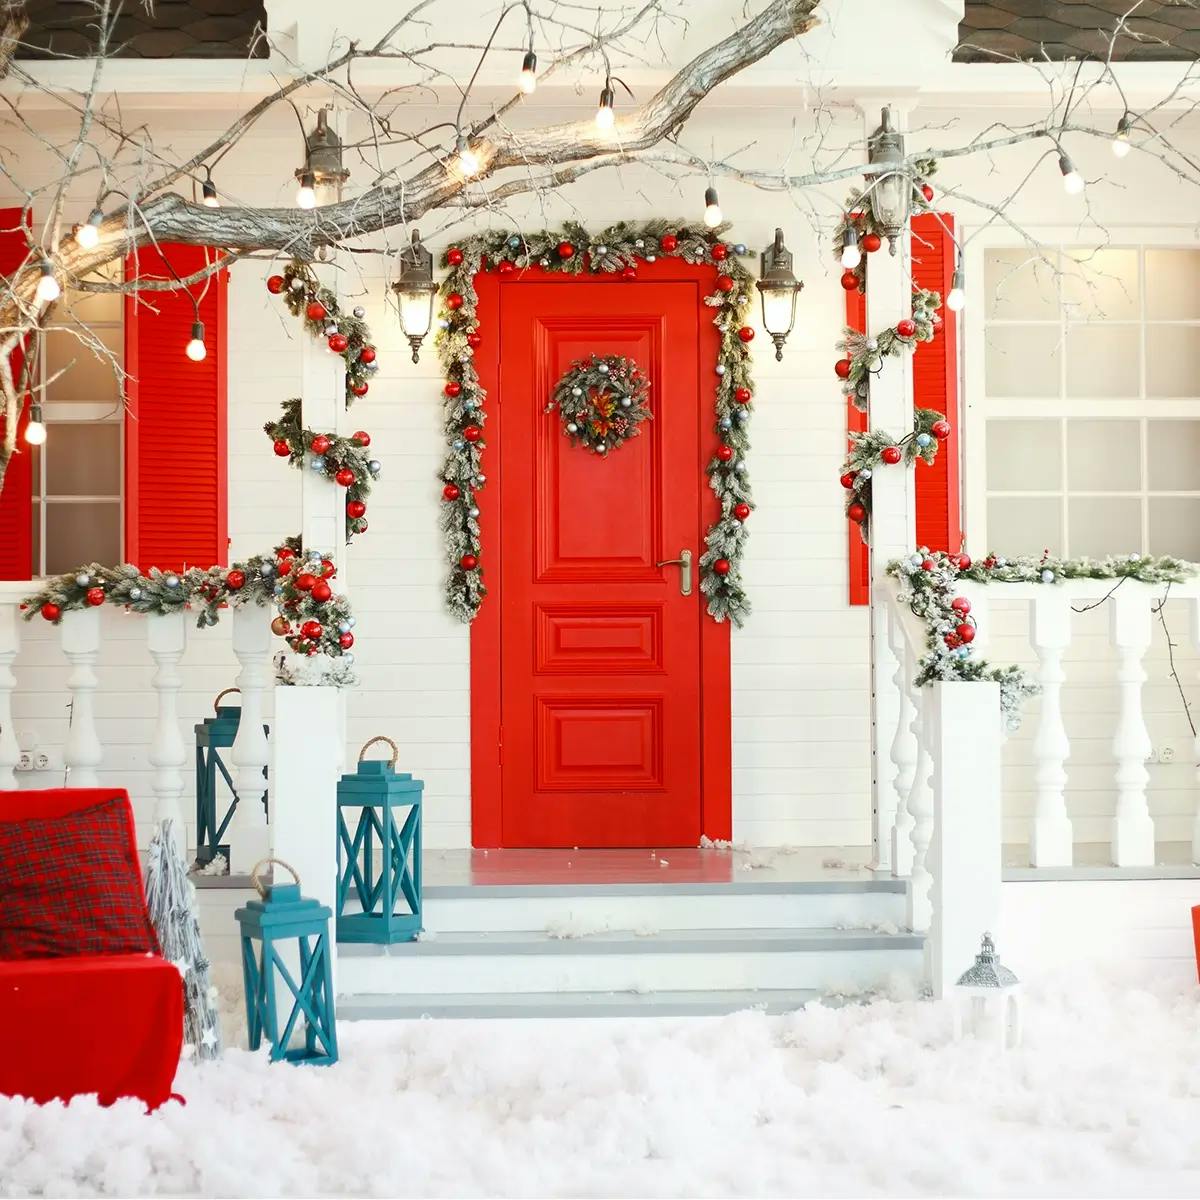 Festive white house with red door, garland over door, with a red bench in front with pillows.